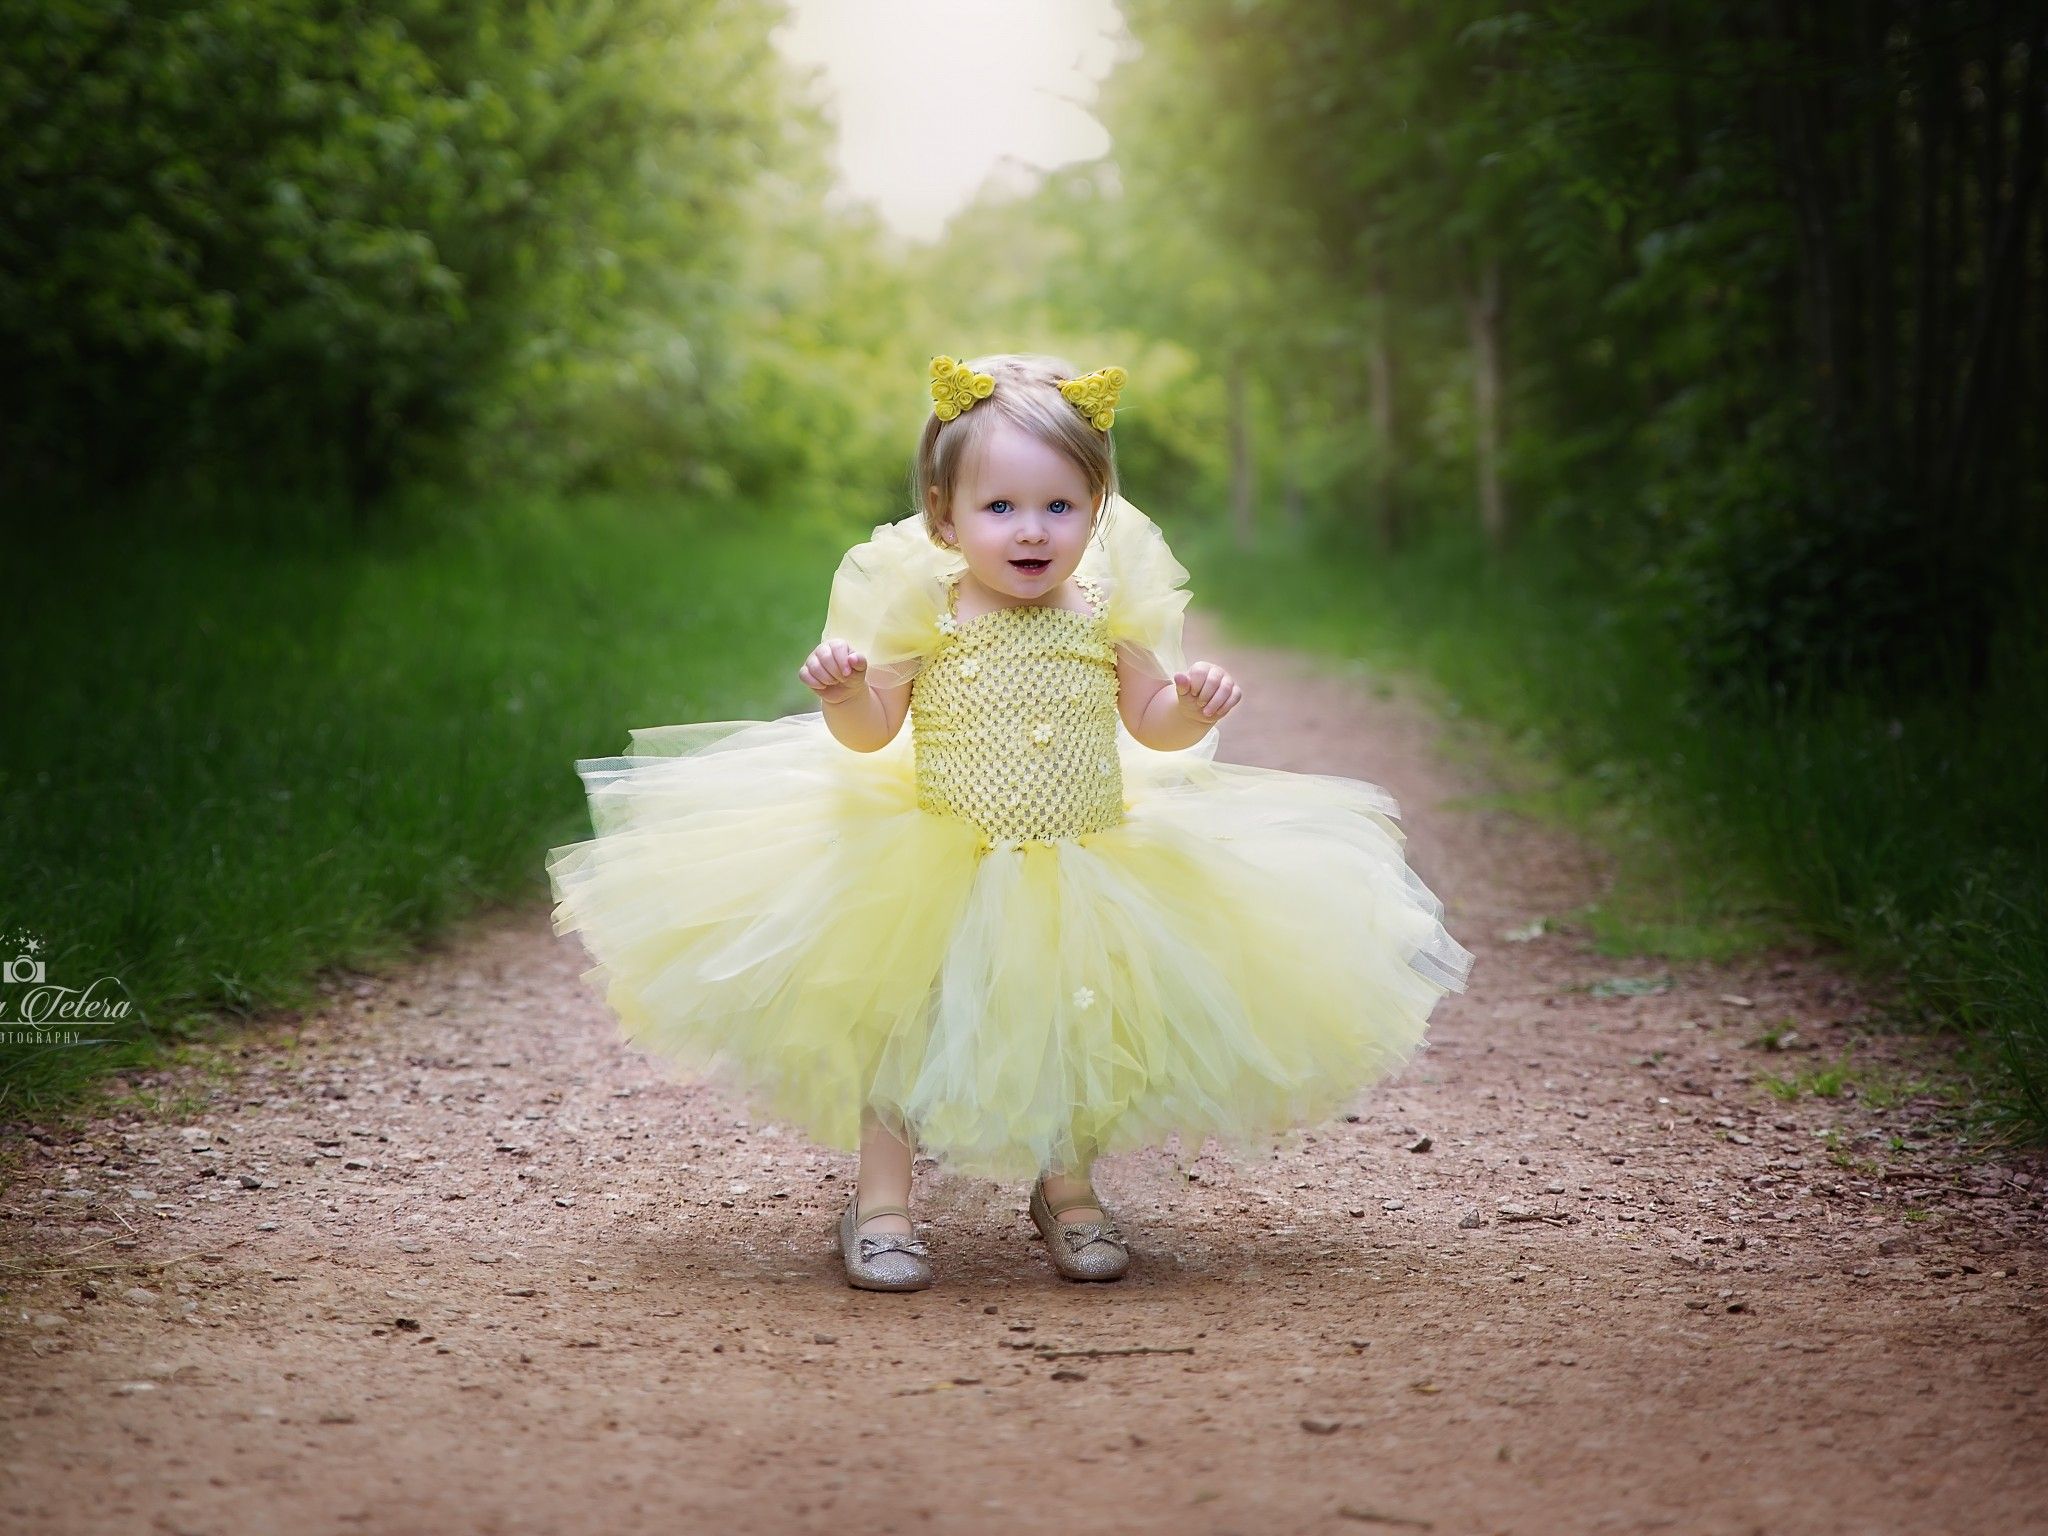 Wallpaper Cute baby girl, HD, 5K, Cute,. Wallpaper for iPhone, Android, Mobile and Desktop